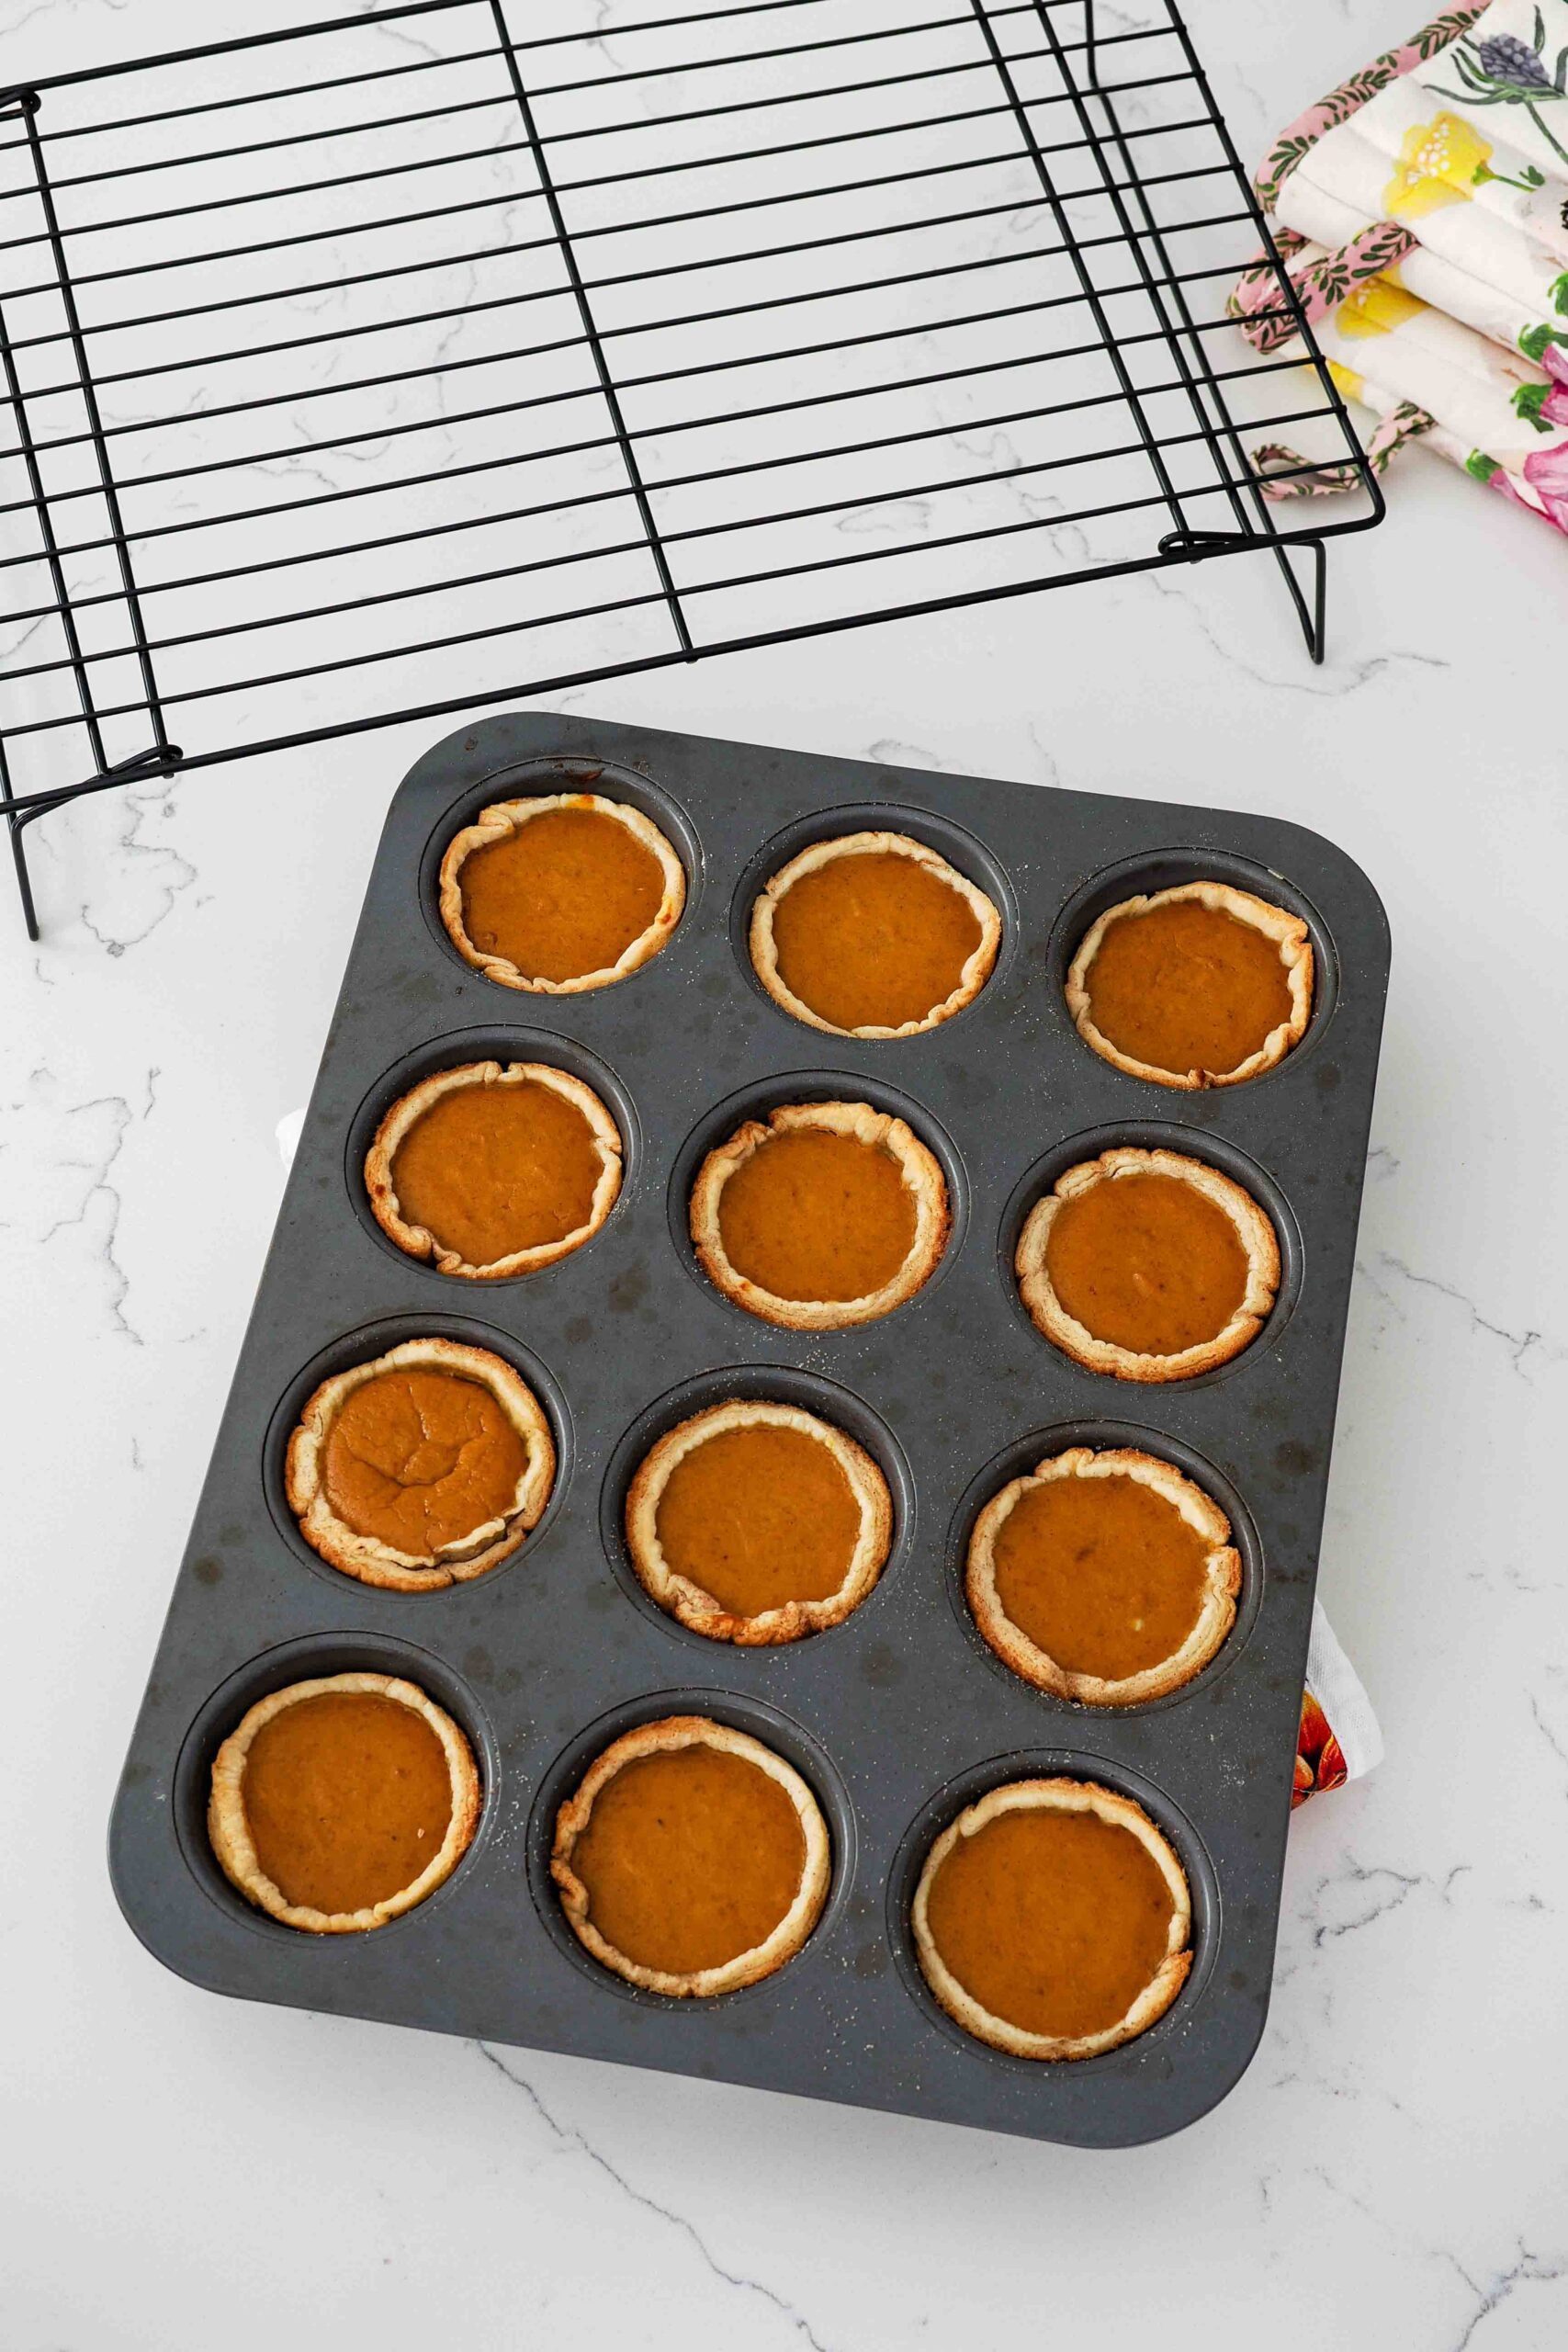 Baked mini pumpkin pies in a muffin pan straight out of the oven.